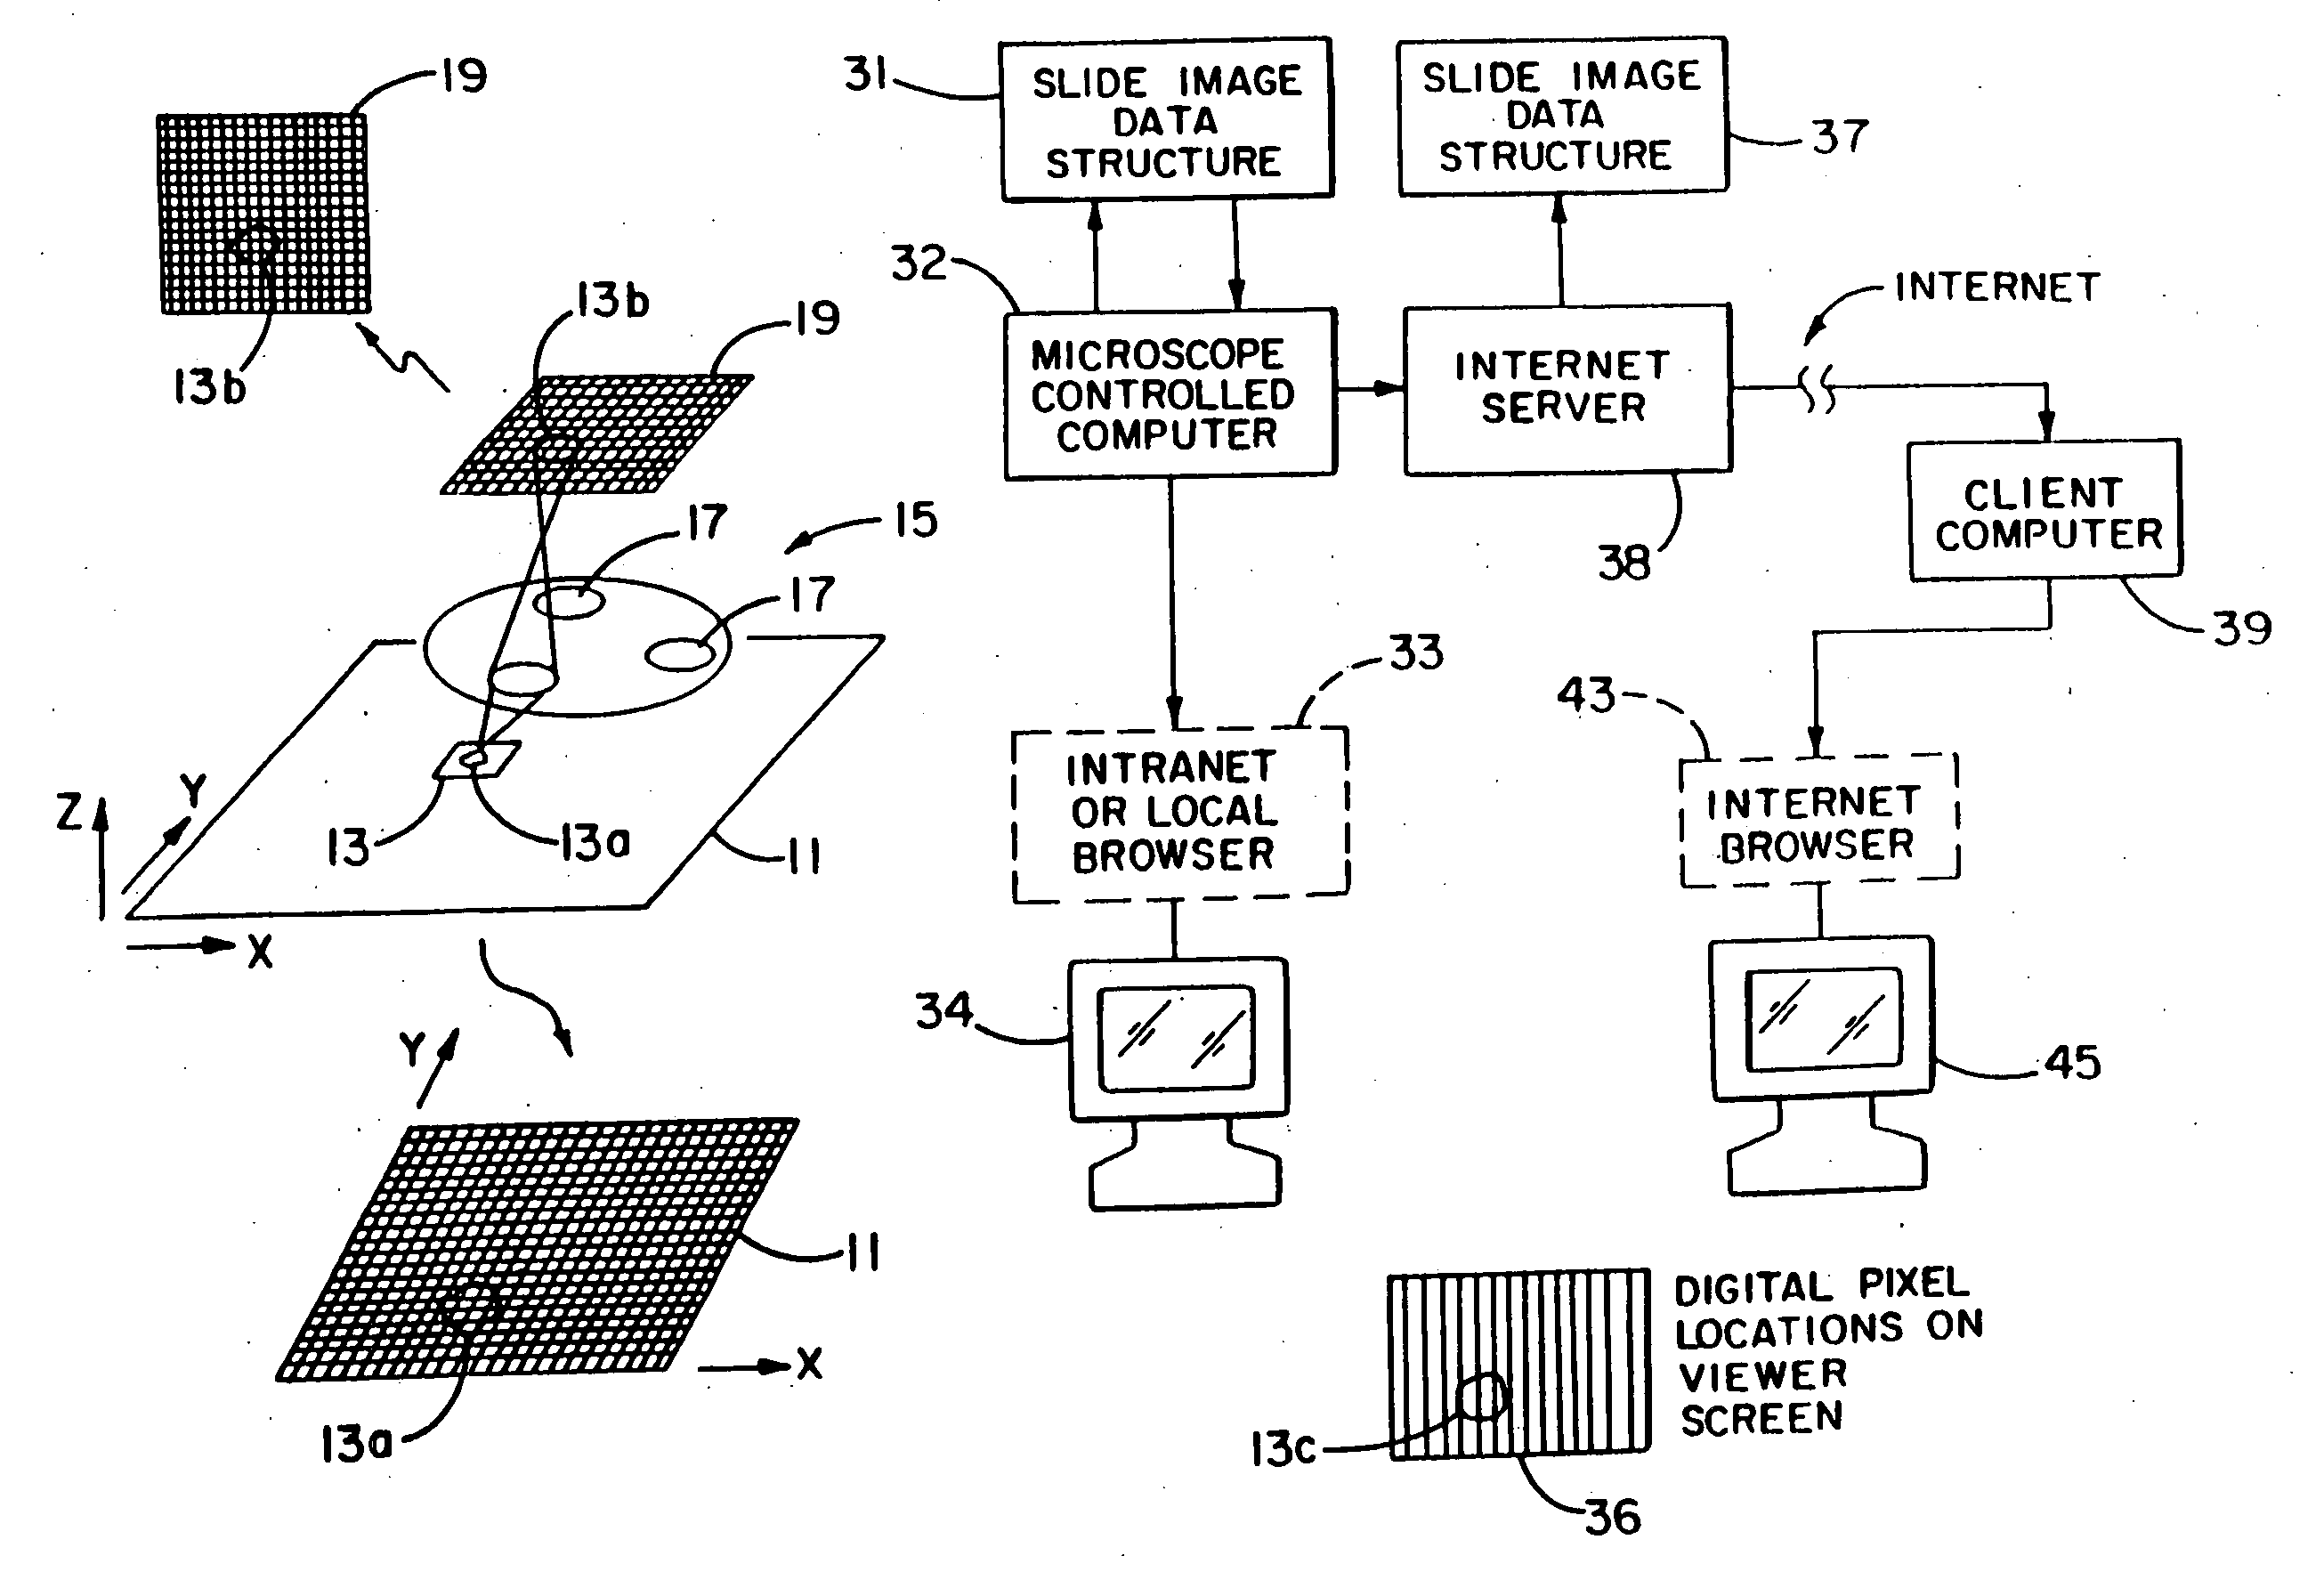 Method and apparatus for Internet, intranet, and local viewing of virtual microscope slides